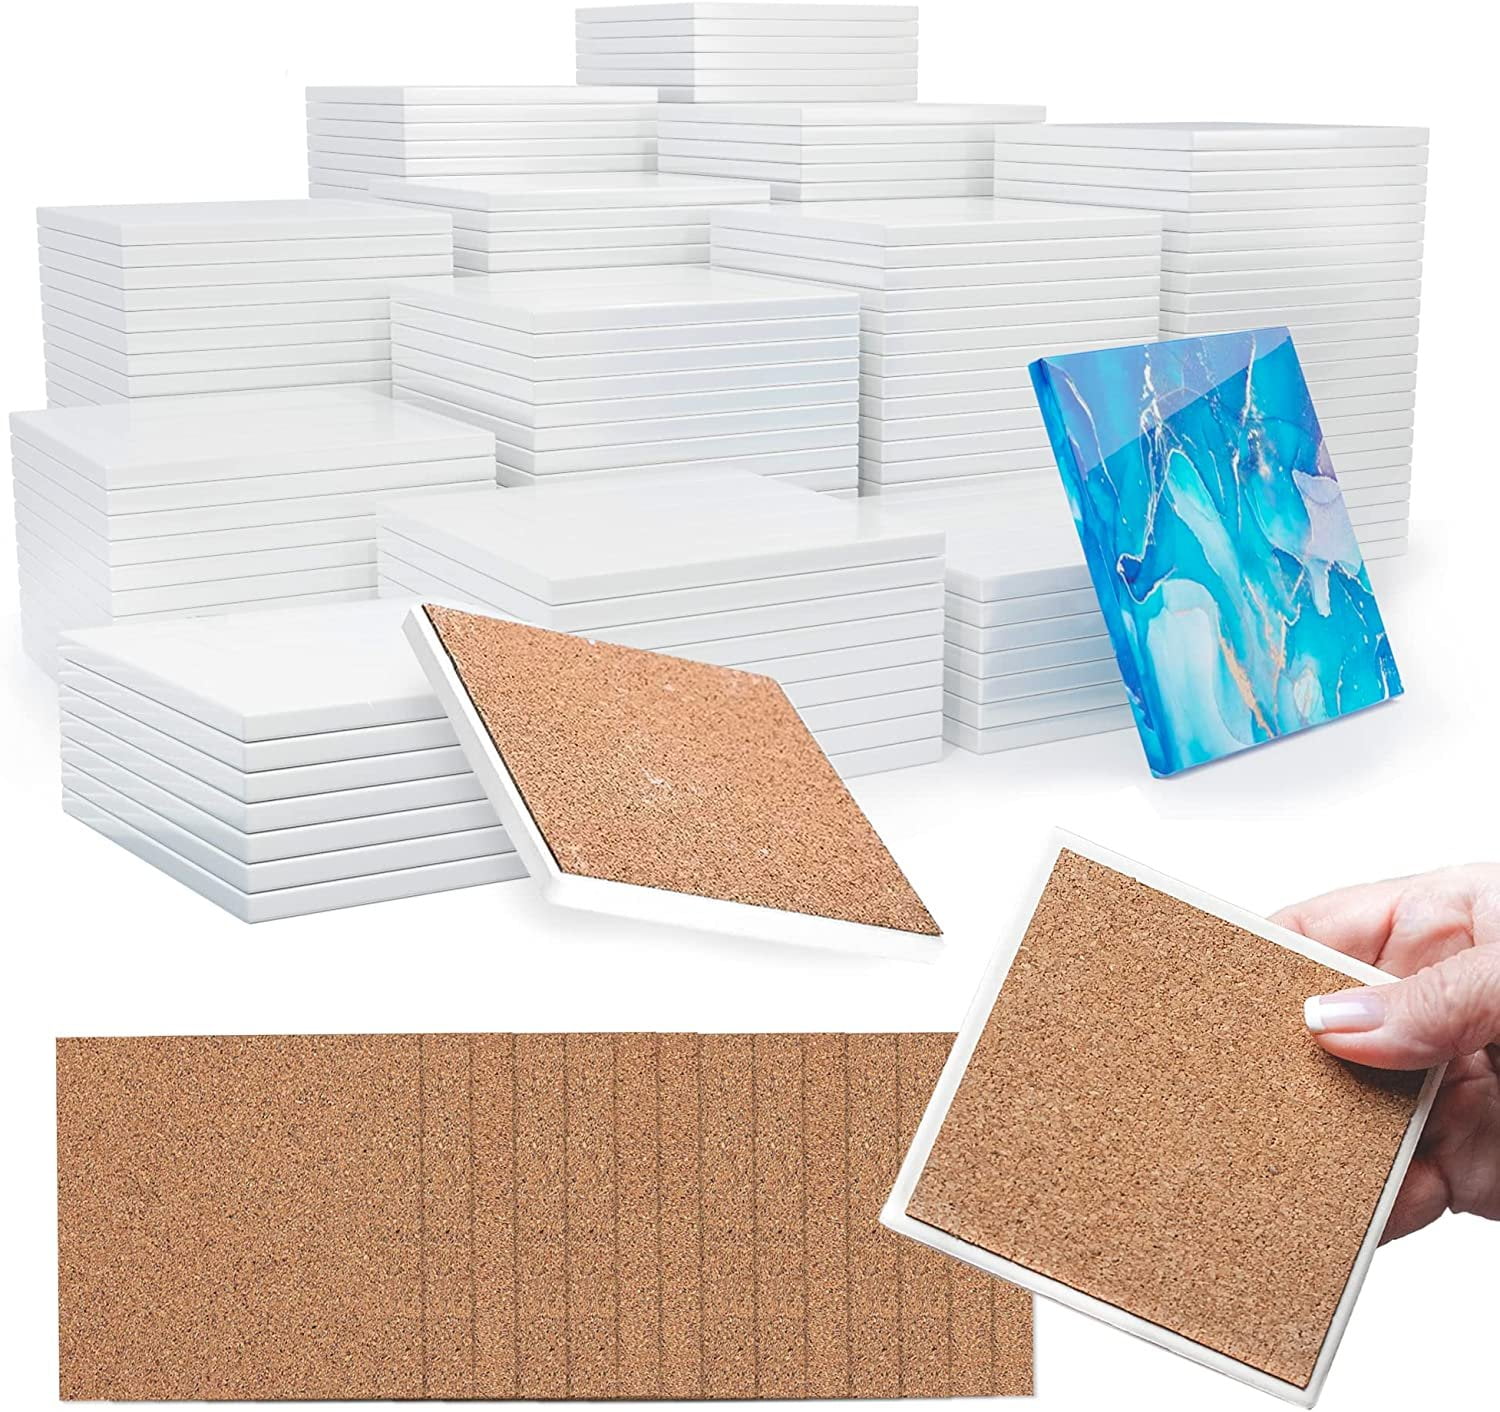 24 Pack of Ceramic Tiles for Crafts and Coasters - 4 Tiles with Cork  Backers, 12 Round and 12 Square - Wholesale Craft Outlet